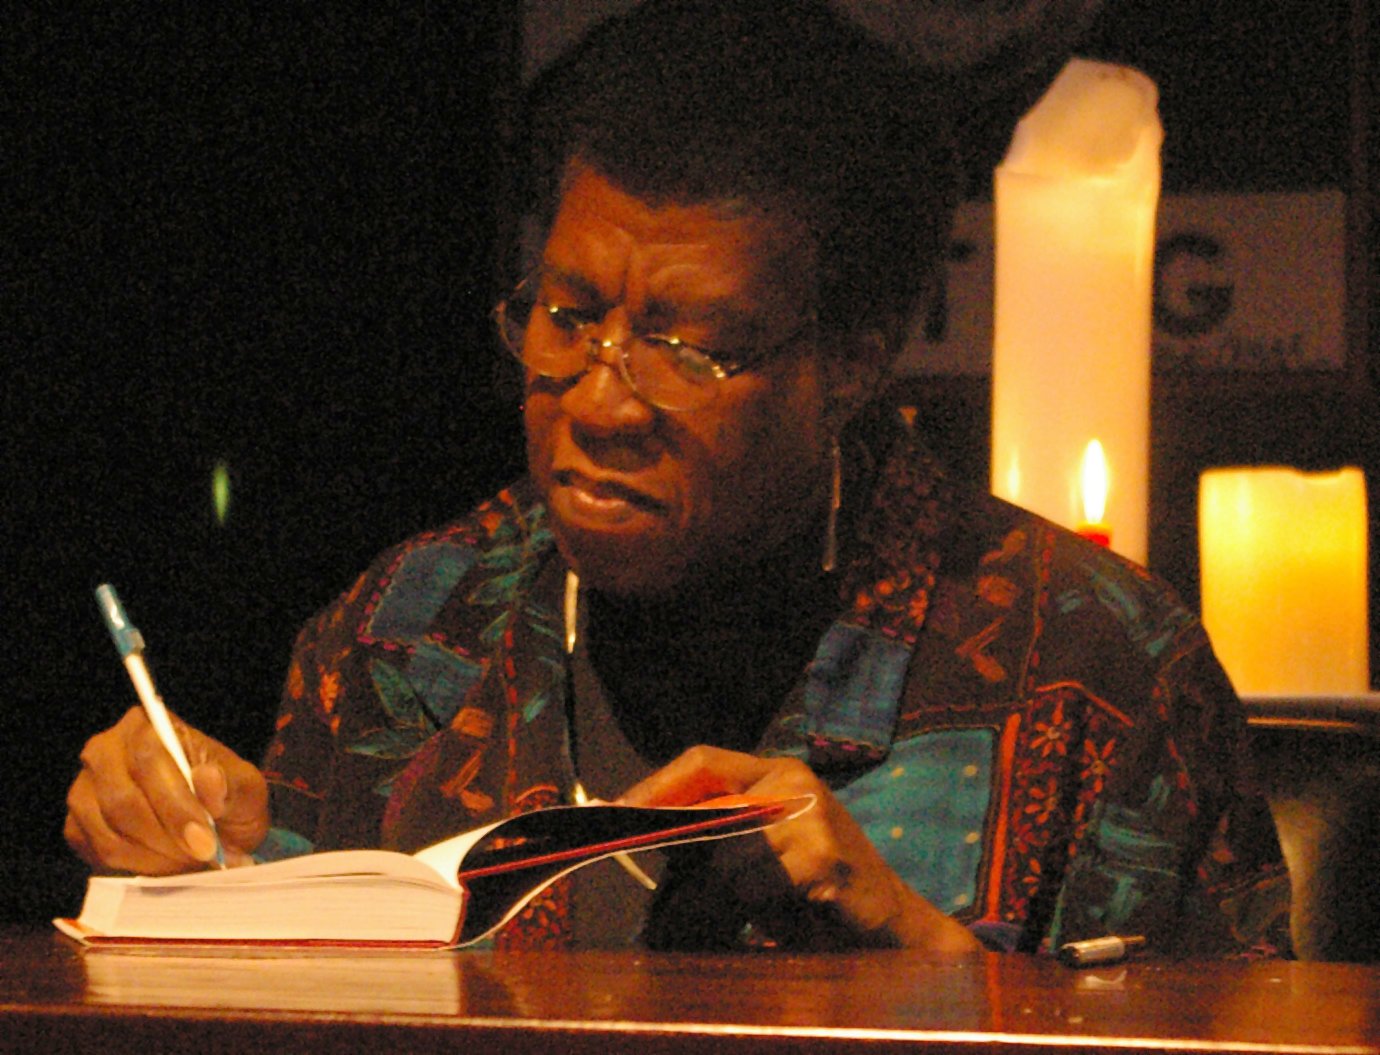 Octavia Butler herself, signing a hardcover copy of a book